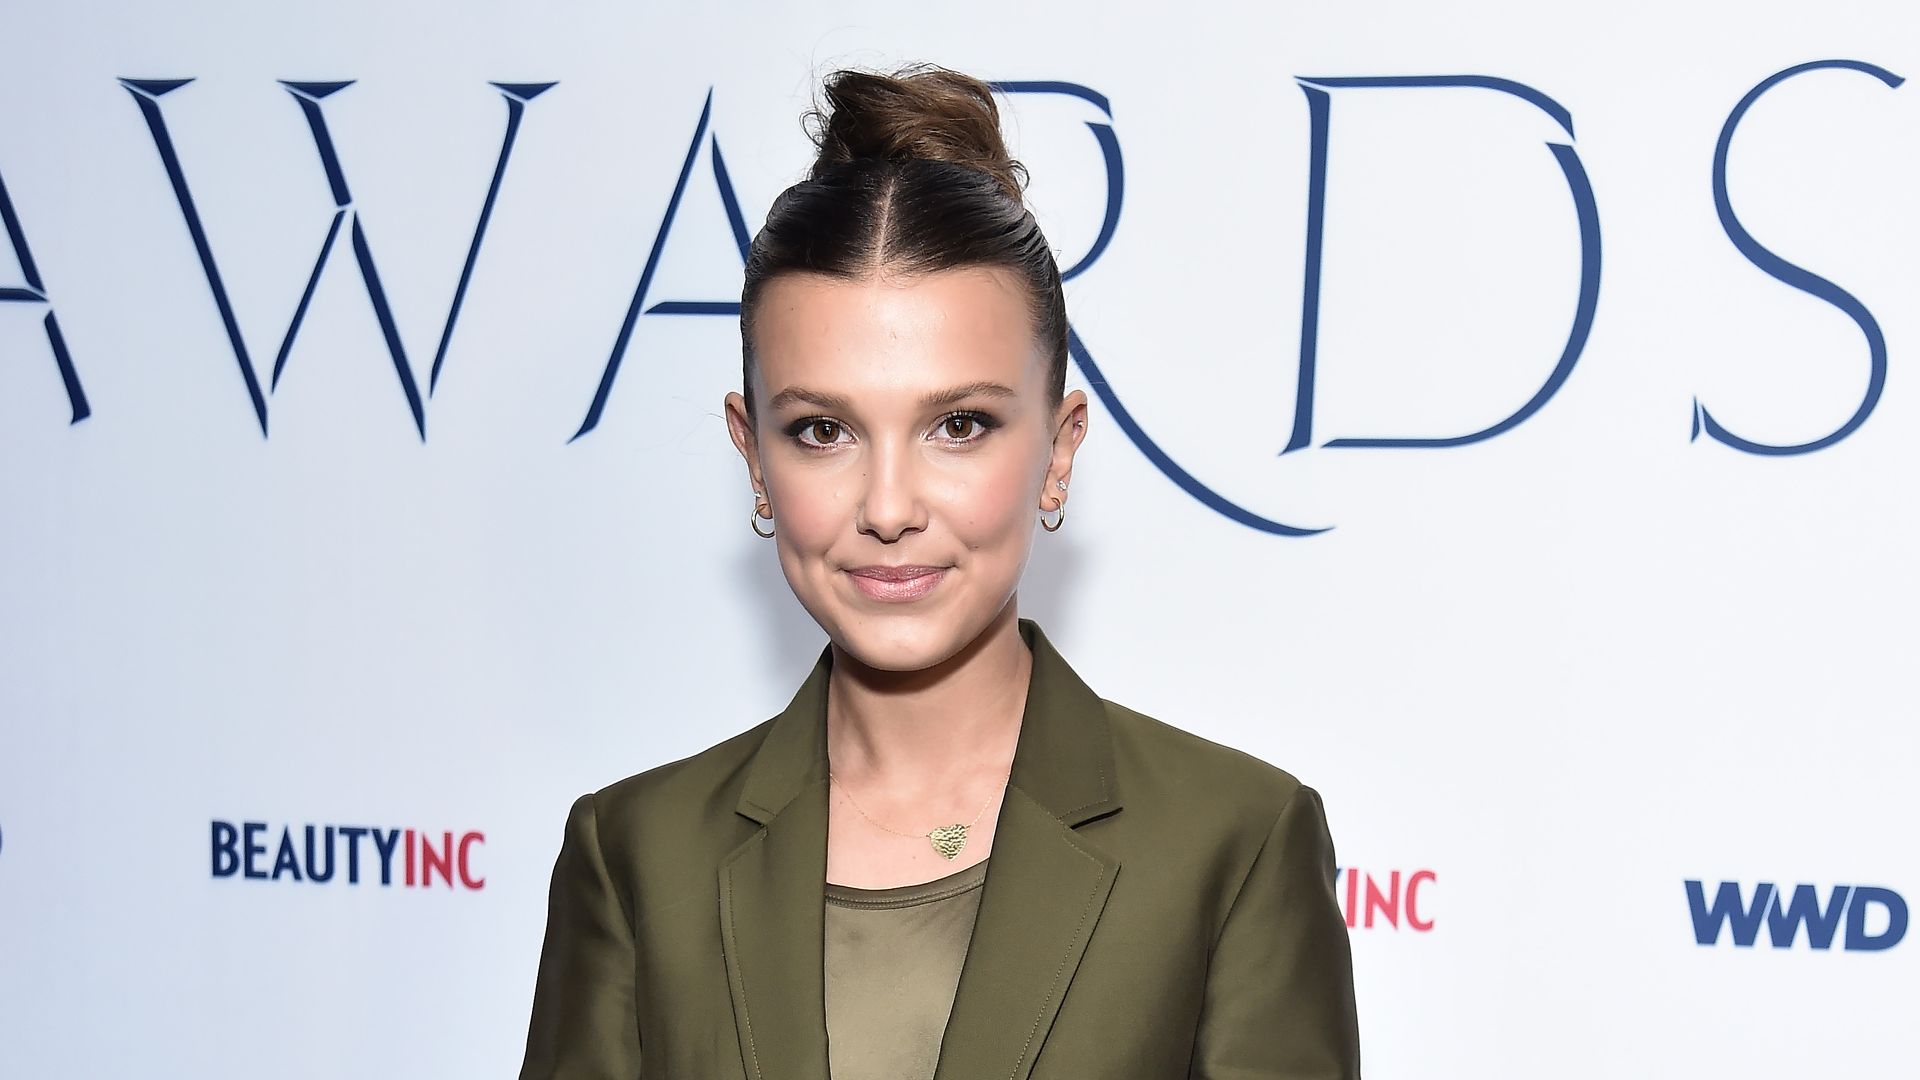 Millie Bobby Brown is glowing in glamorous new photoshoot with special news